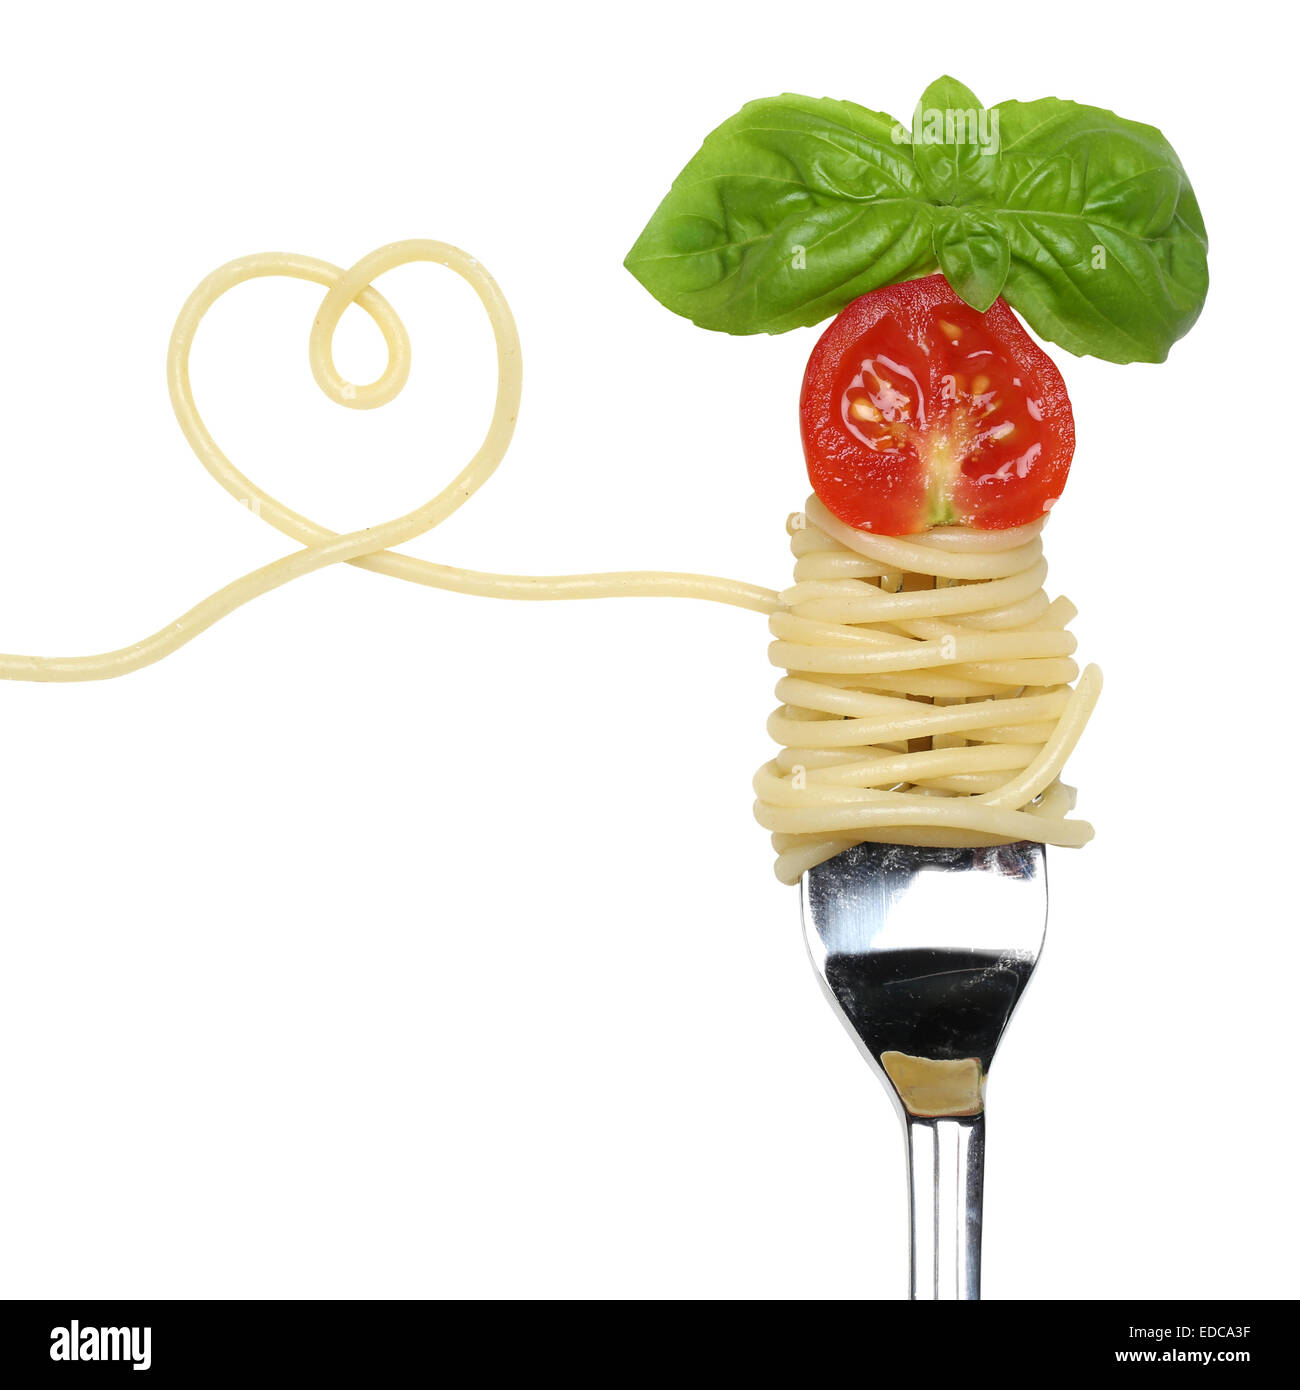 Spaghetti noodles pasta meal with heart, tomato on a fork love topic Stock Photo